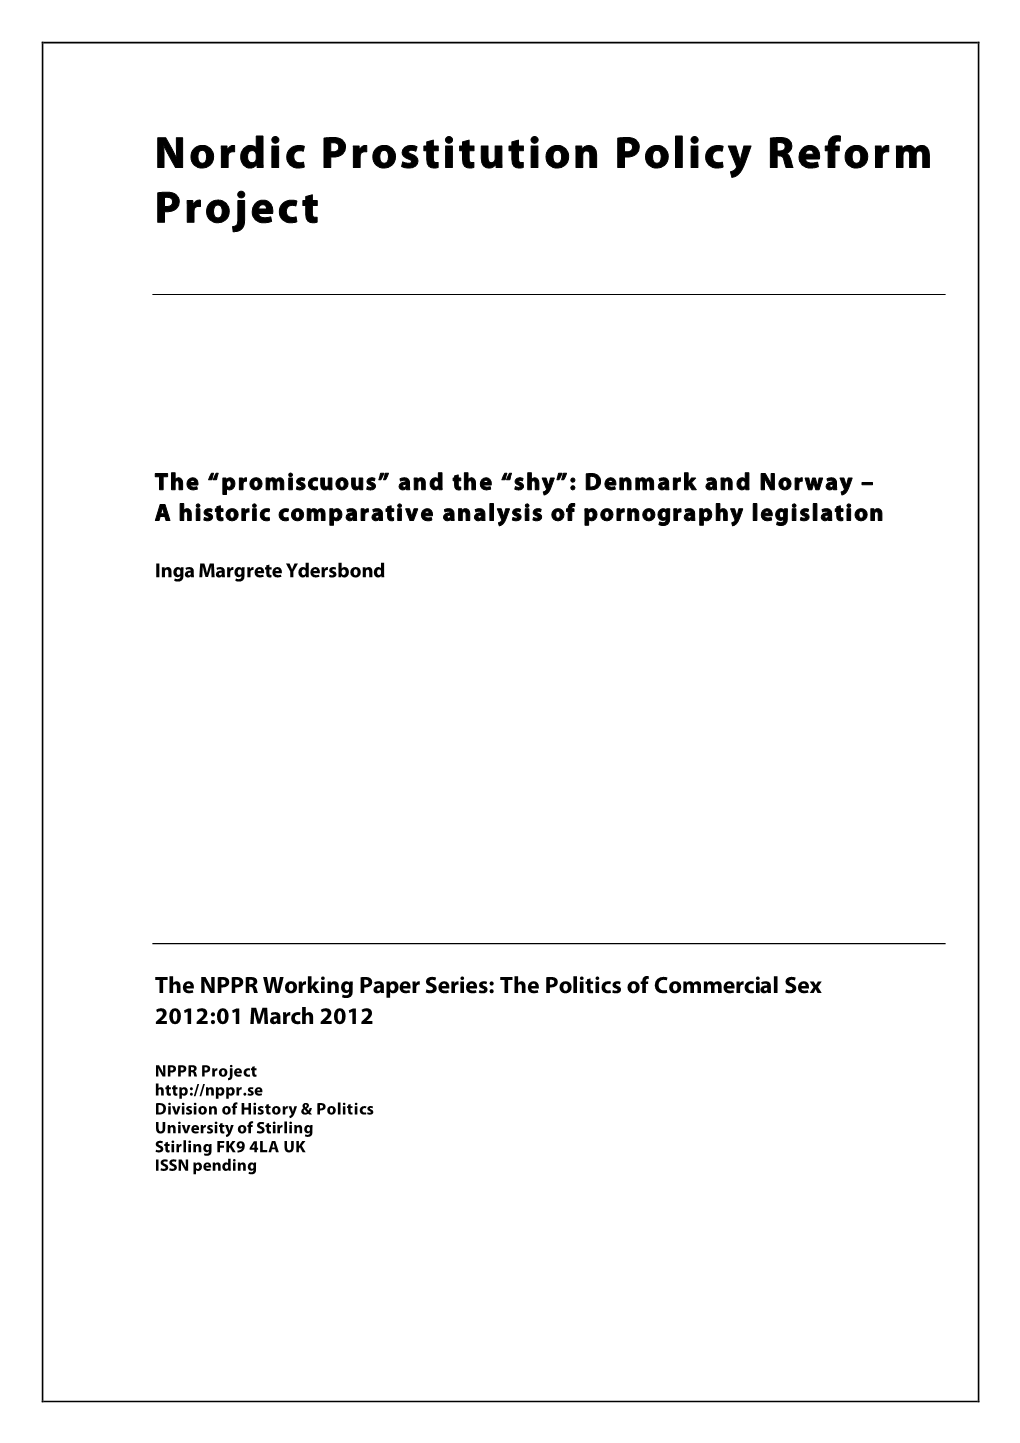 Nordic Prostitution Policy Reform Project